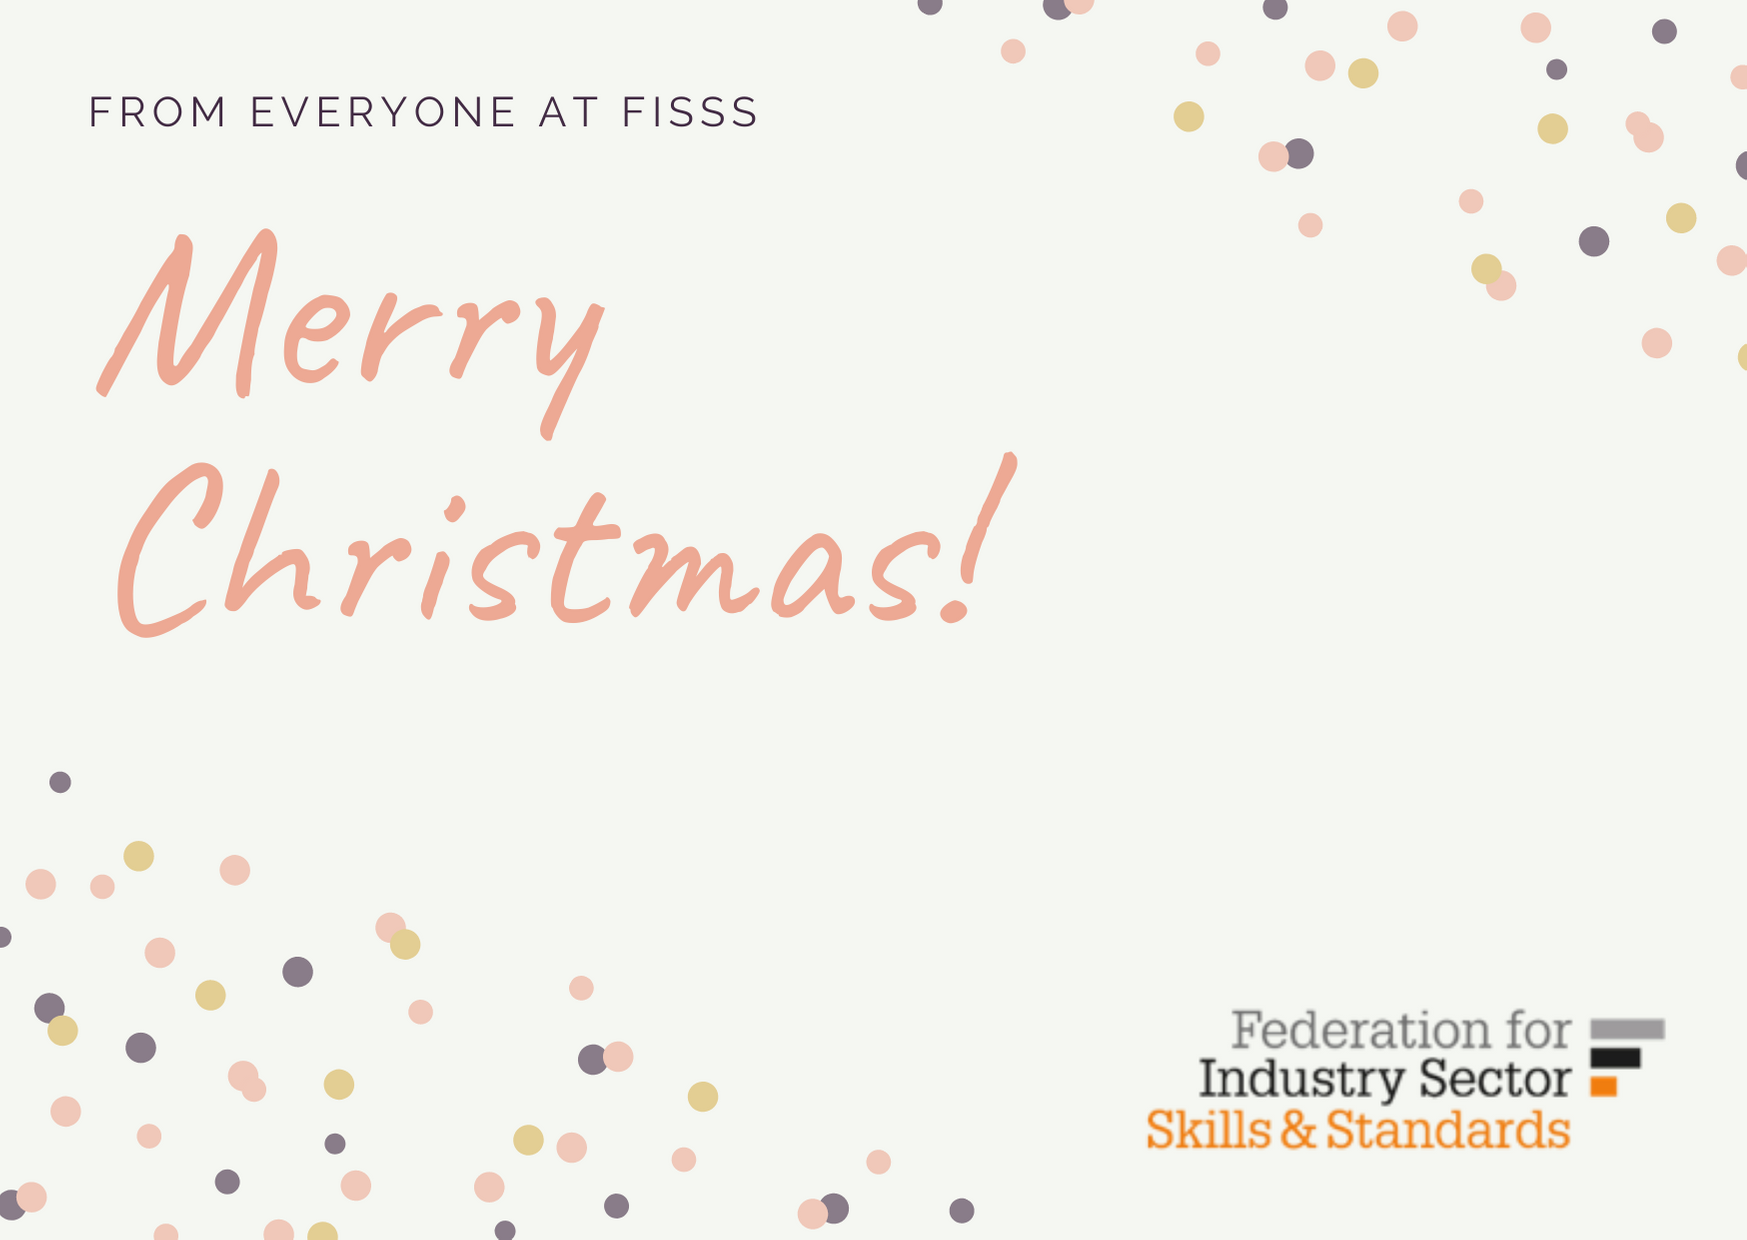 Merry Christmas from the team at FISSS